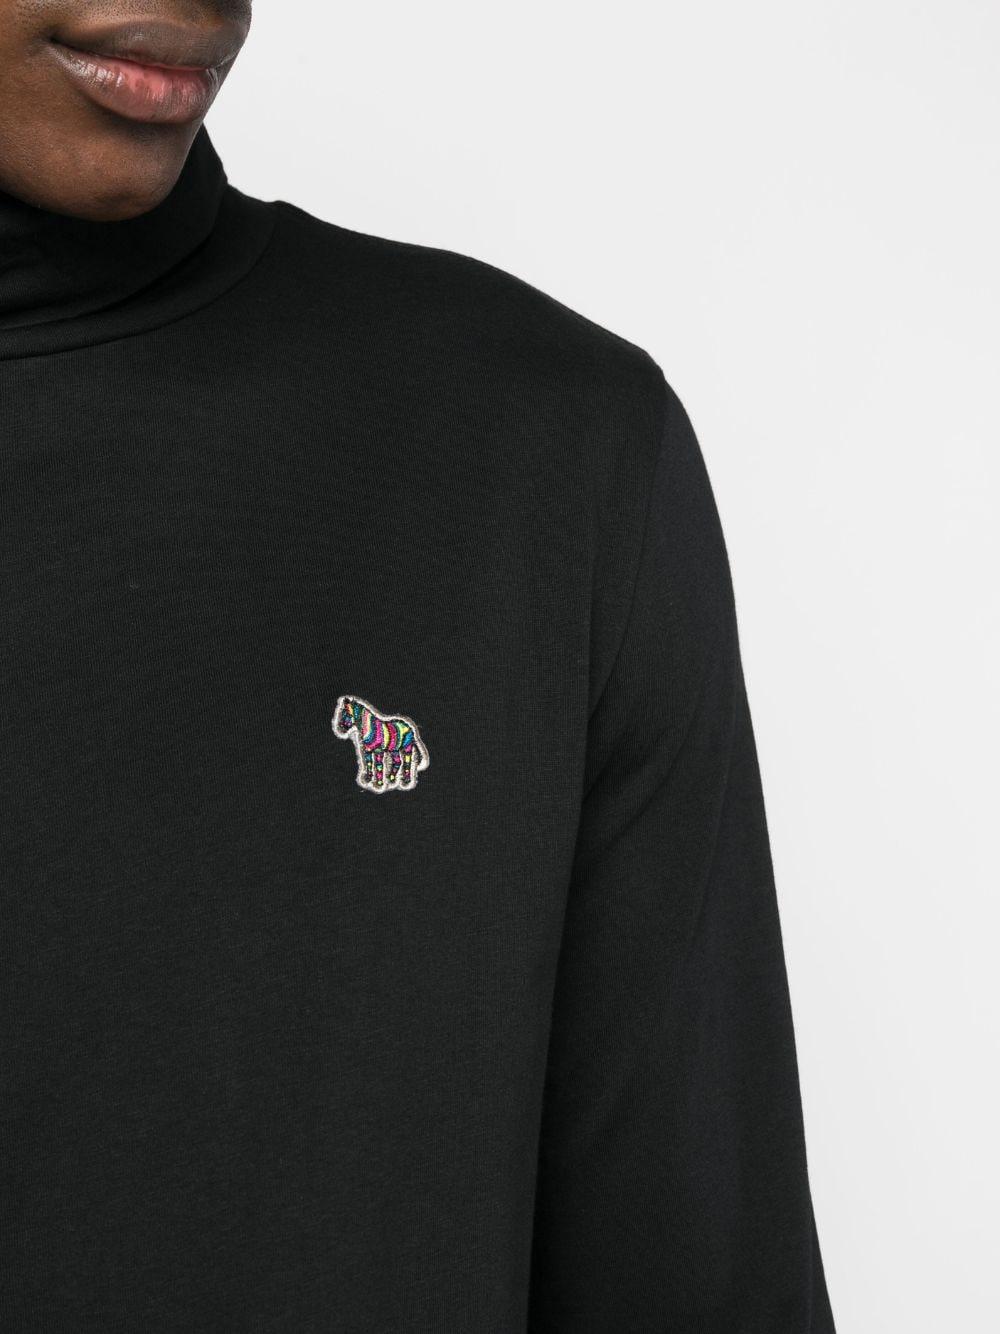 PS by Paul Smith Zebra-patch Roll-neck Jumper in Black for Men | Lyst